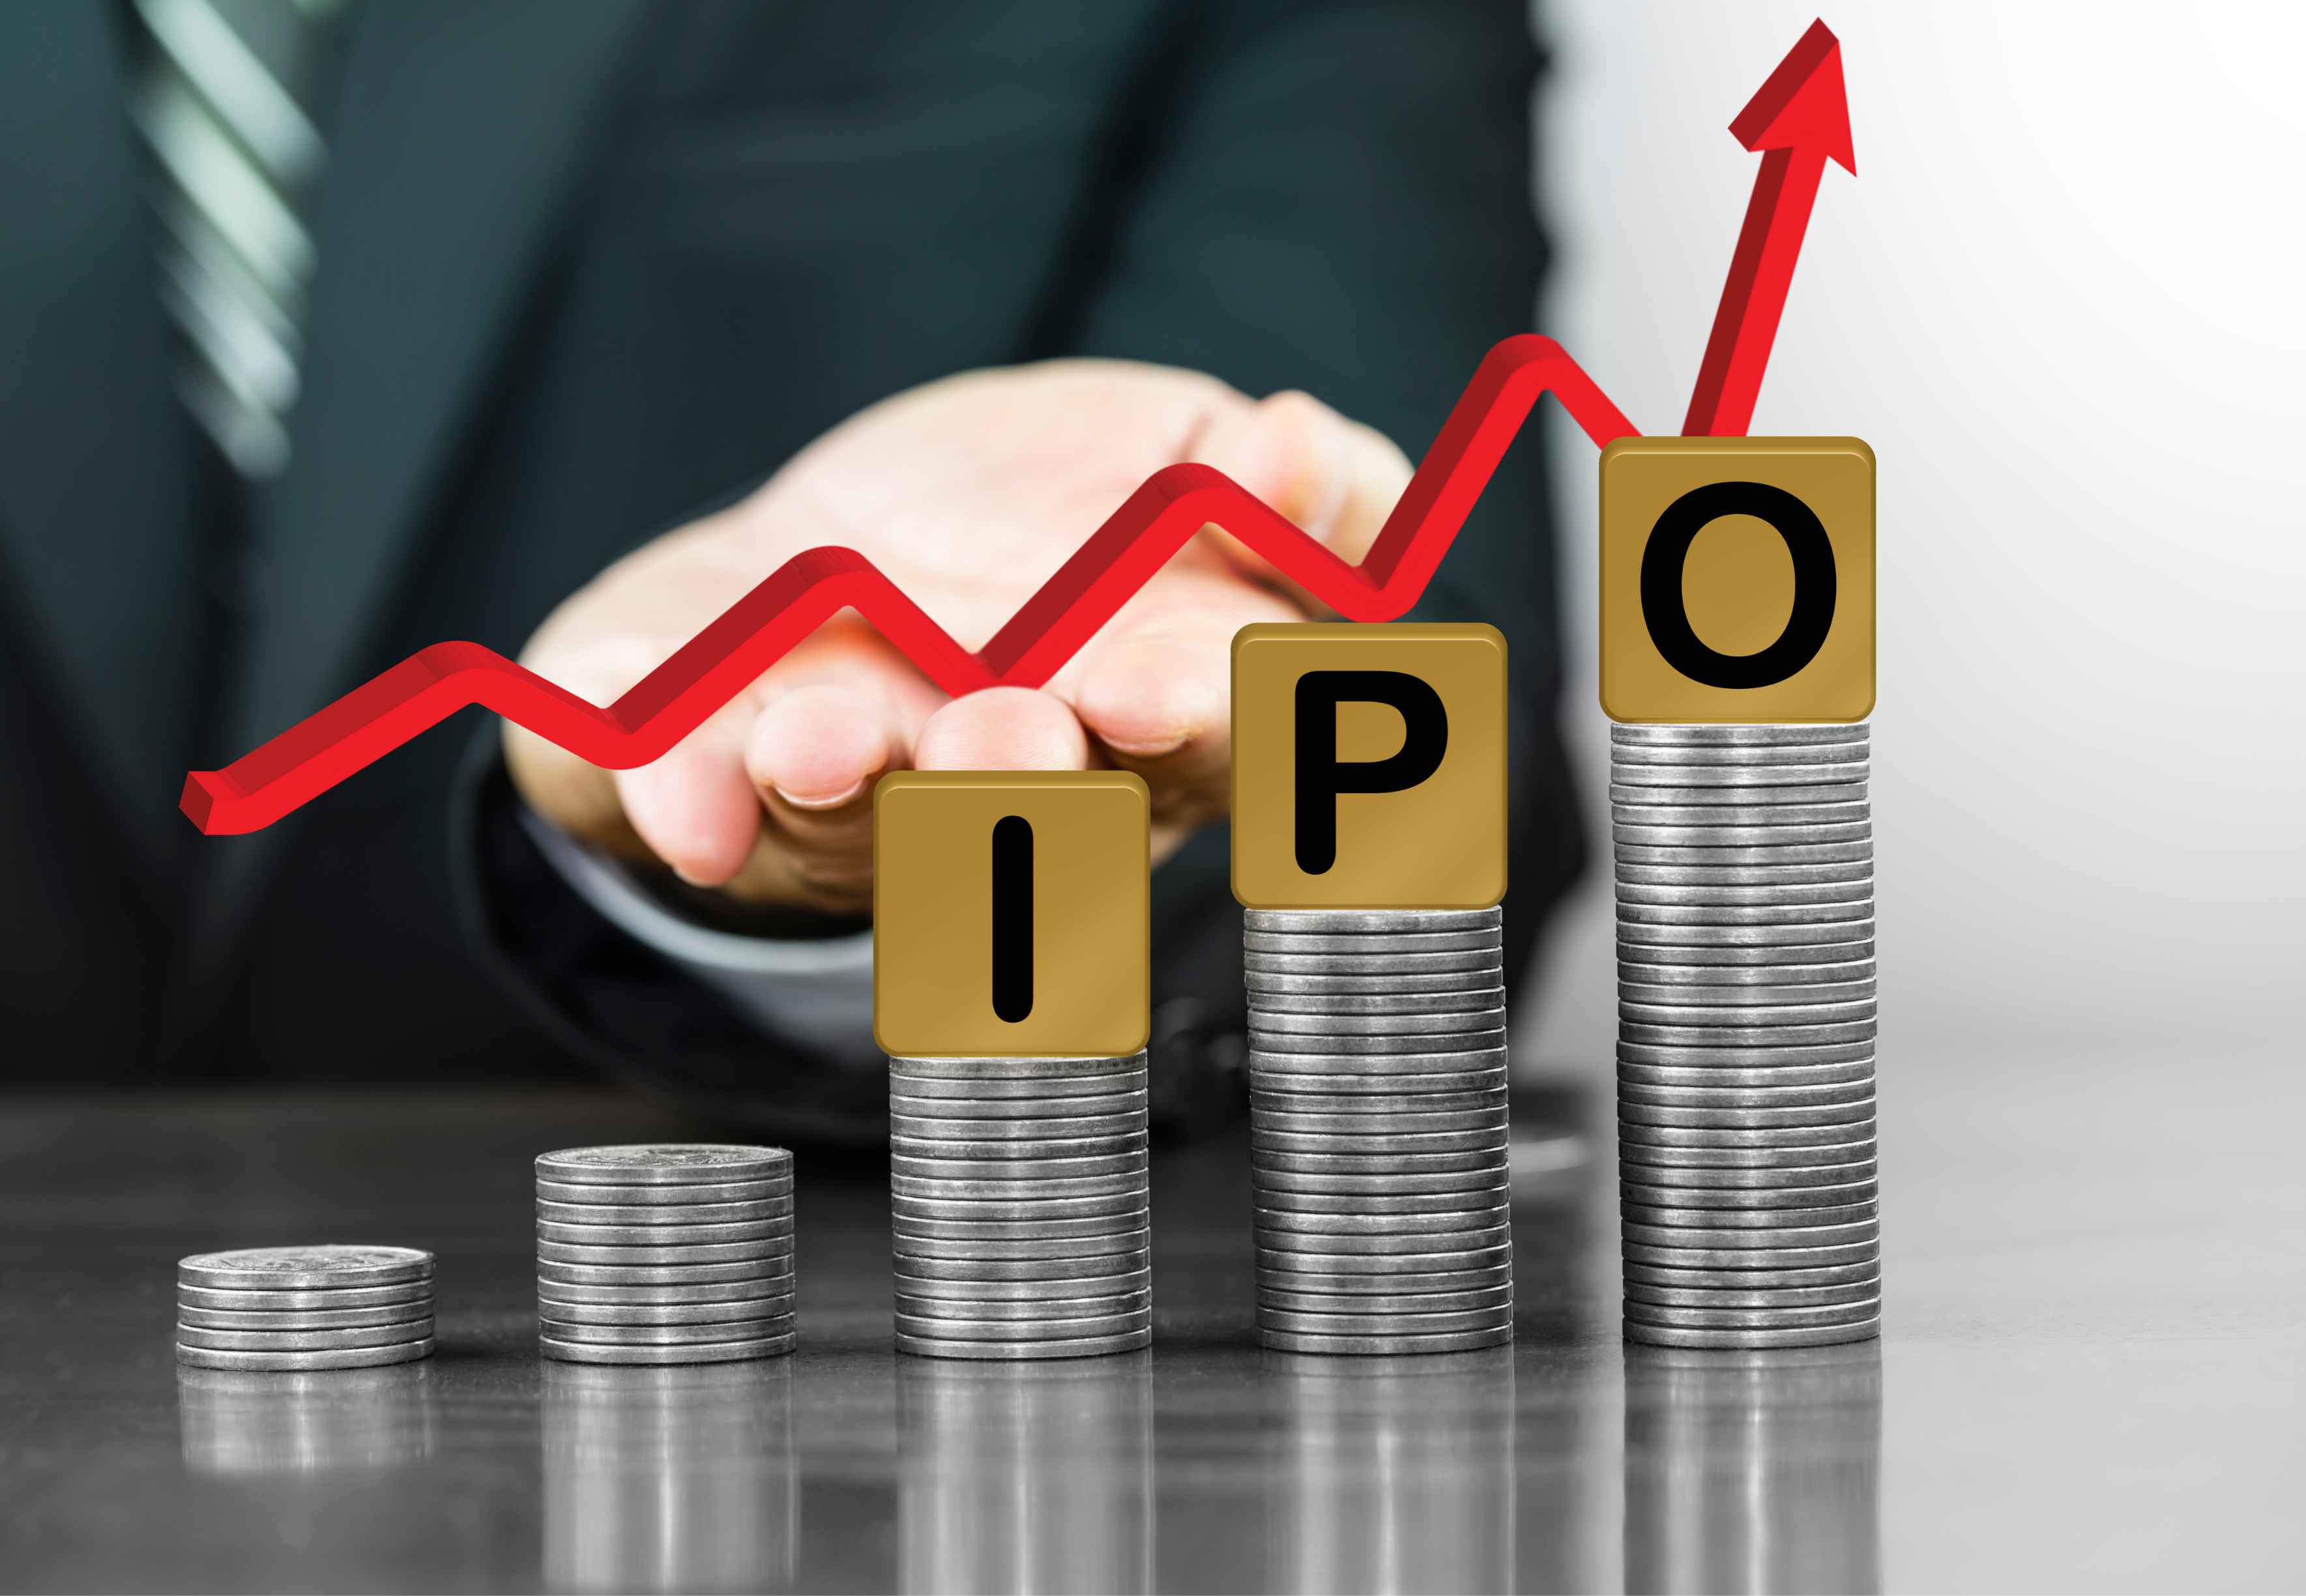 Credo brands to open for IPO: Here are some facts to know about the public offer